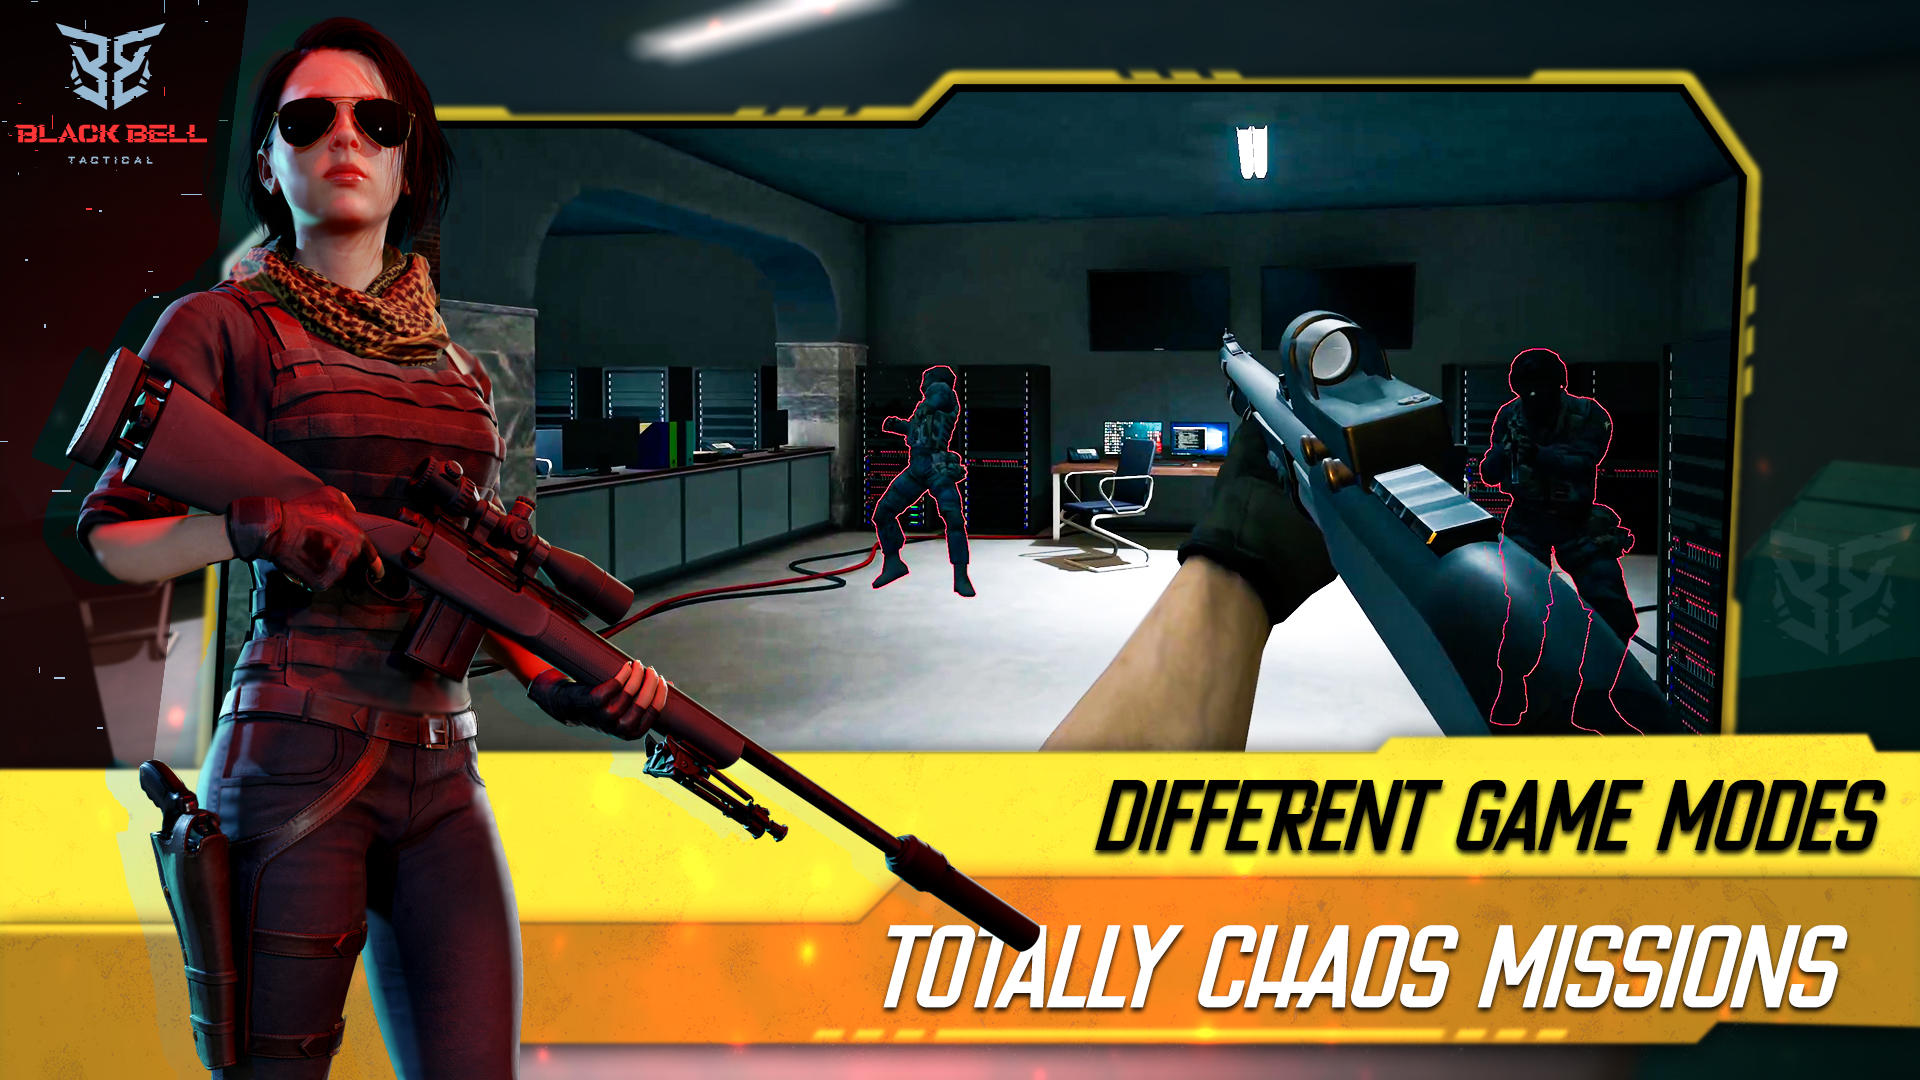 Top 5 Best Shooting Games For Android Under 500MB  Shooting Games Under  500MB (Online & Offline) 